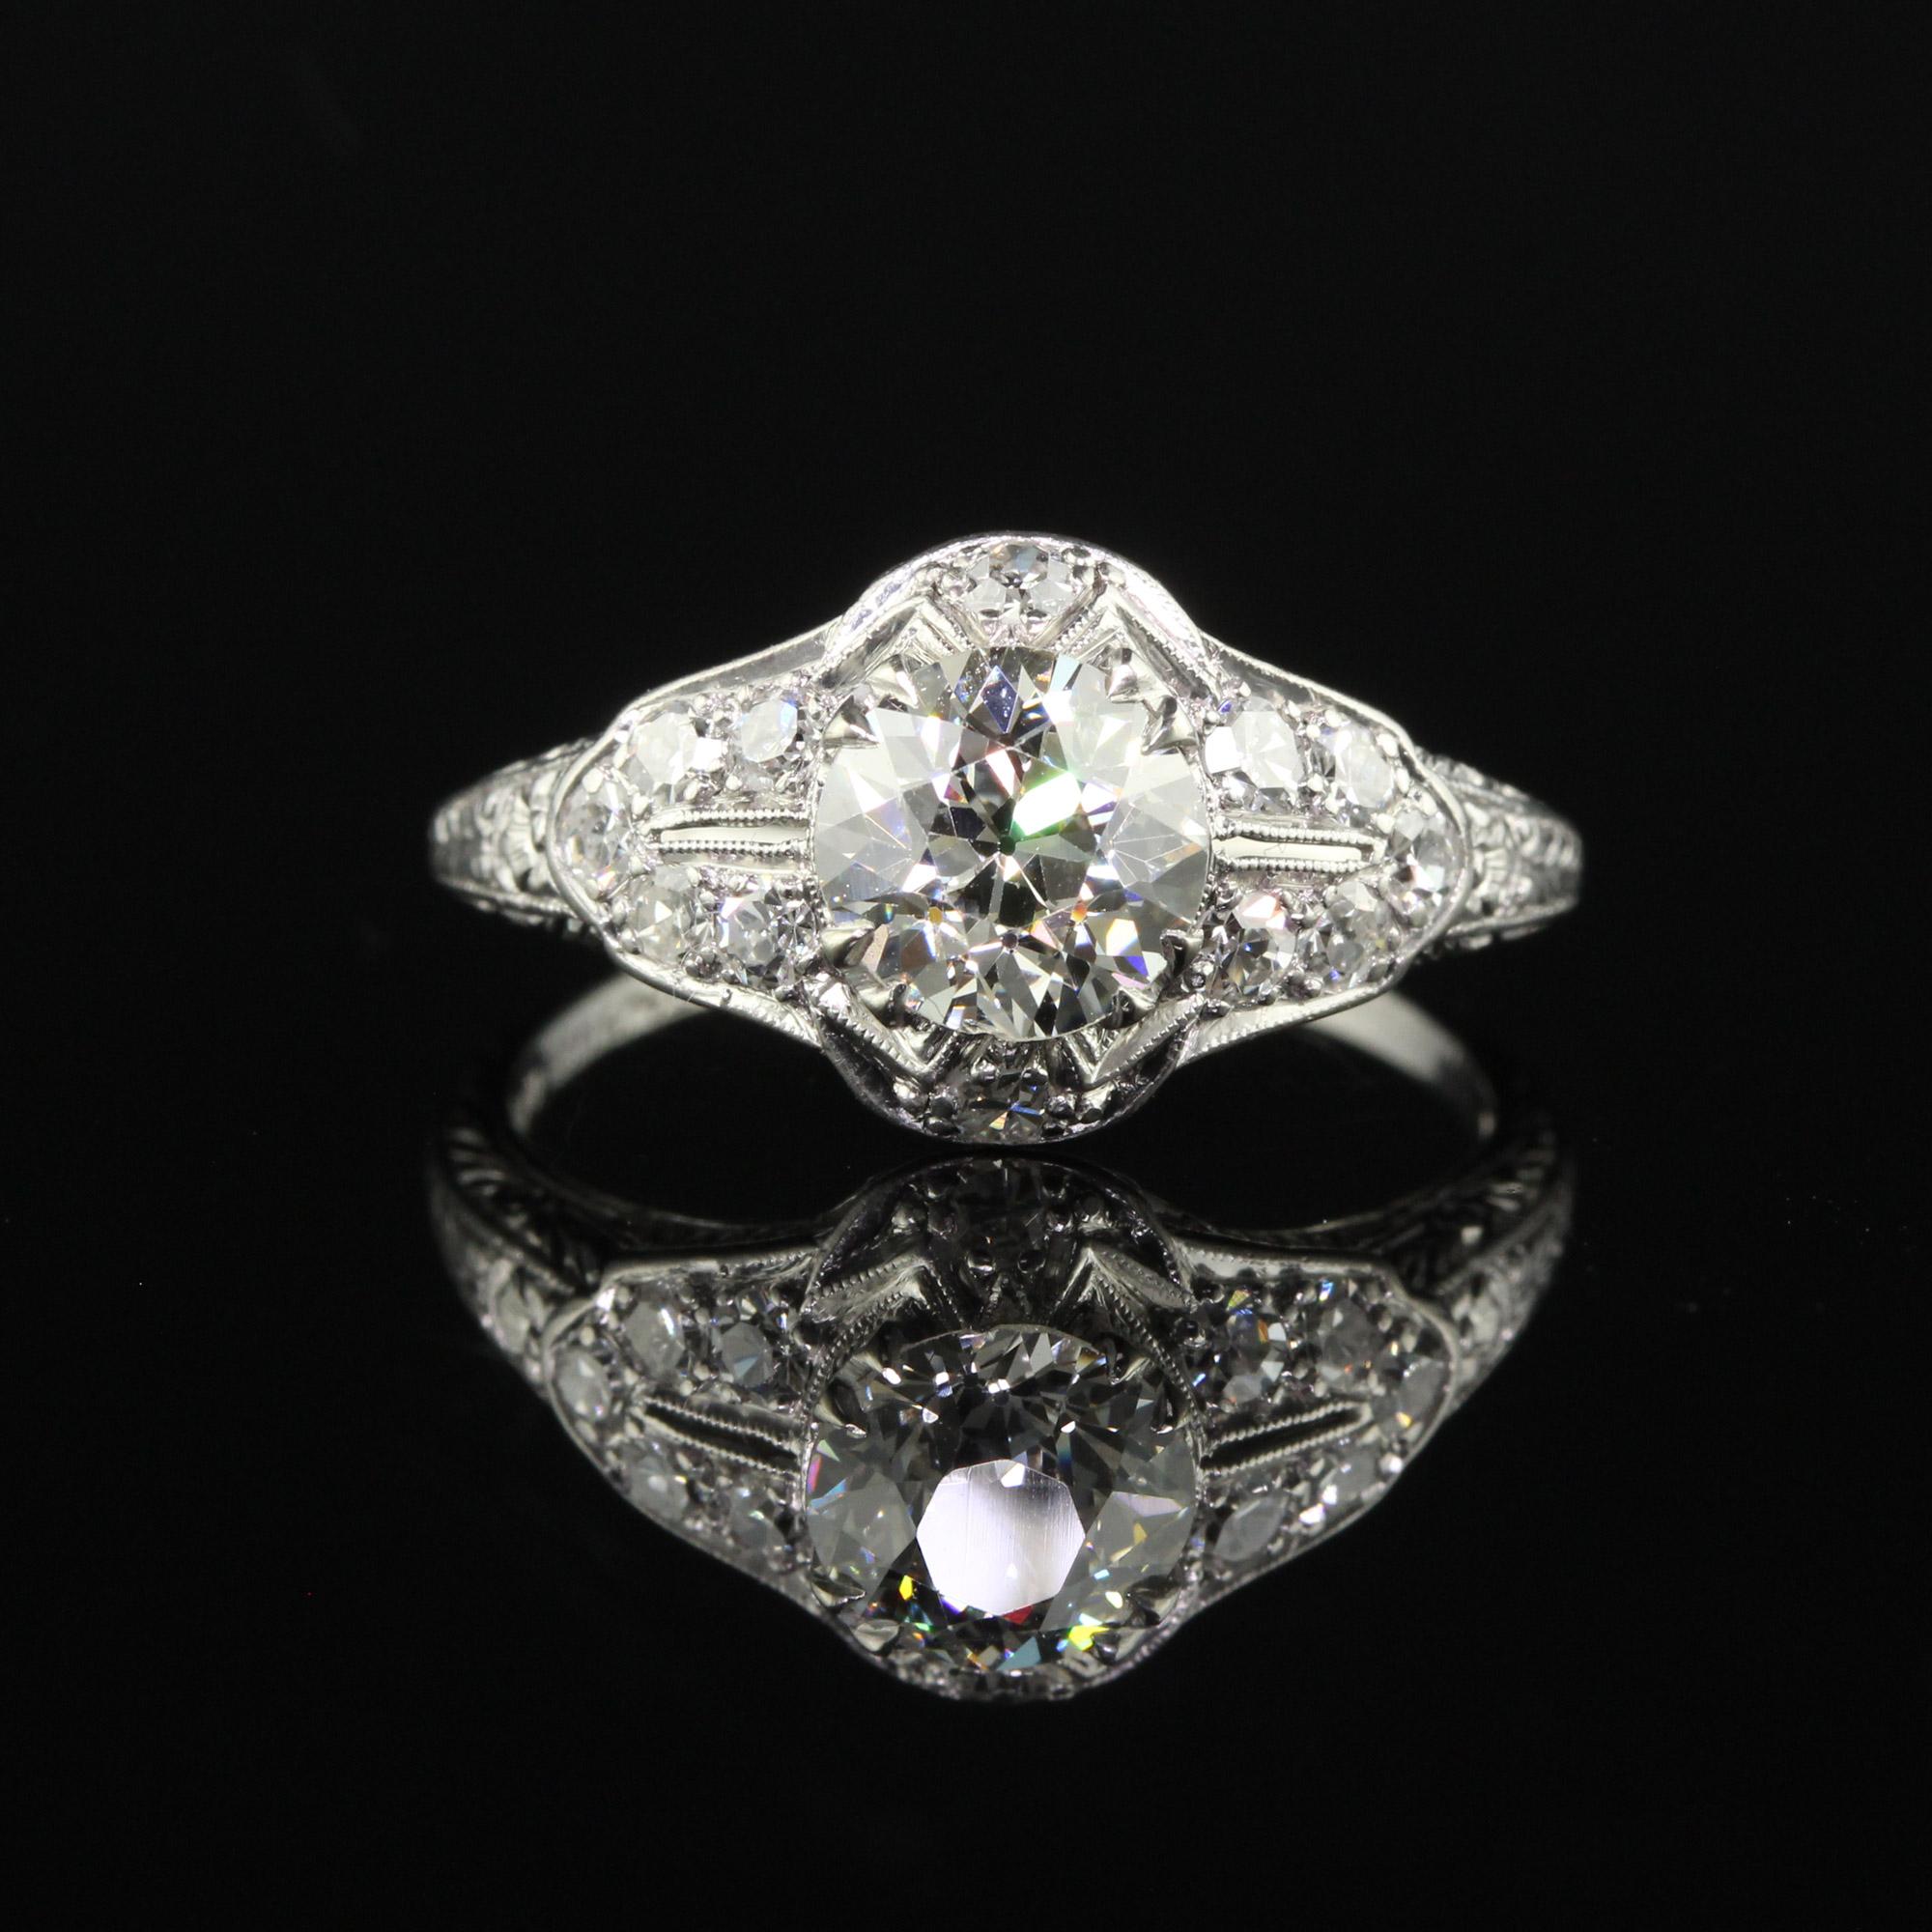 Antique Art Deco Platinum Old Euro Diamond Filigree Engagement Ring - GIA In Good Condition For Sale In Great Neck, NY